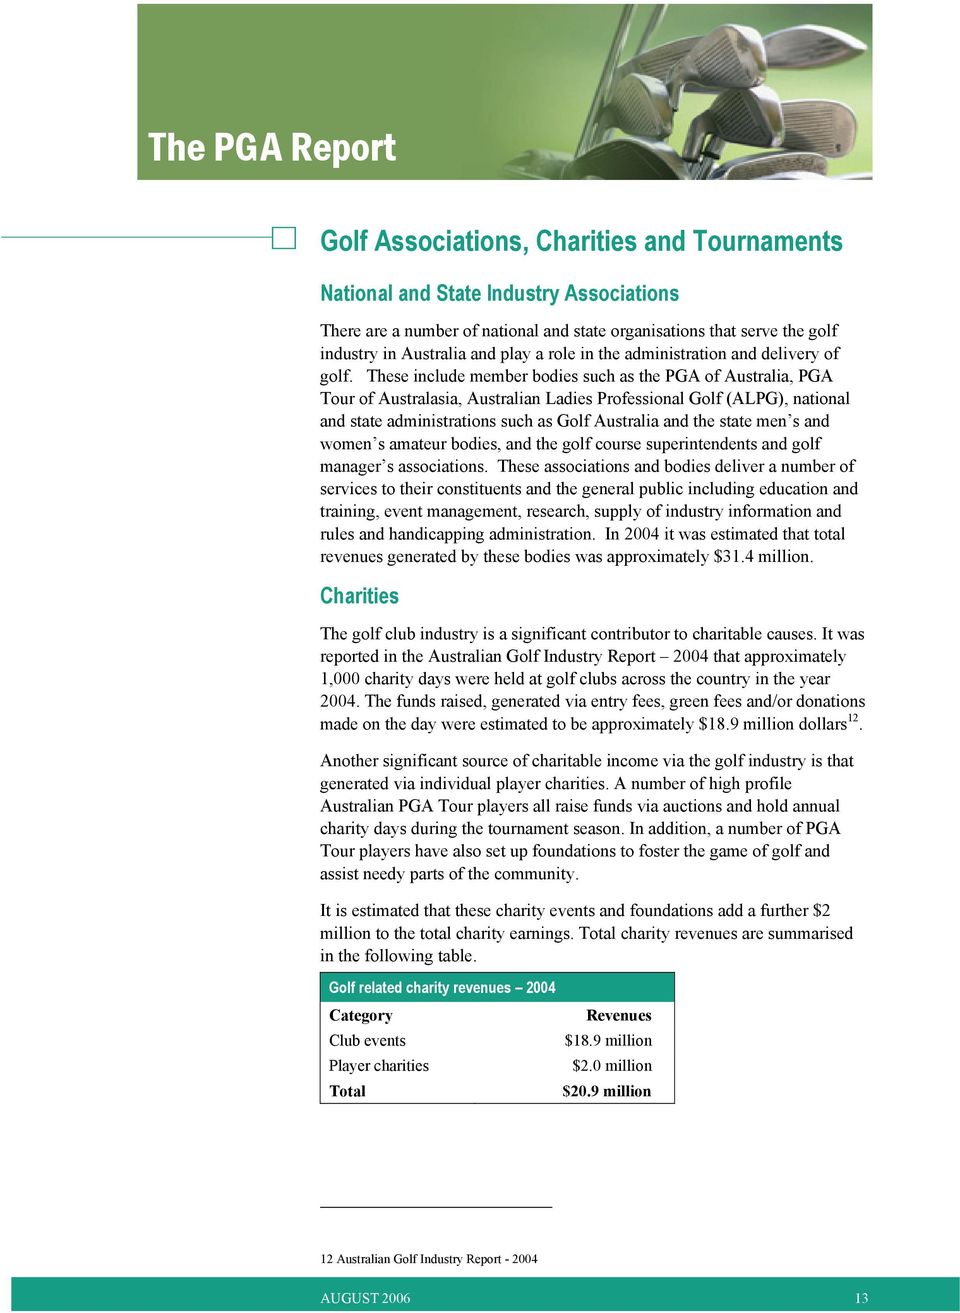 These include member bodies such as the PGA of Australia, PGA Tour of Australasia, Australian Ladies Professional Golf (ALPG), national and state administrations such as Golf Australia and the state